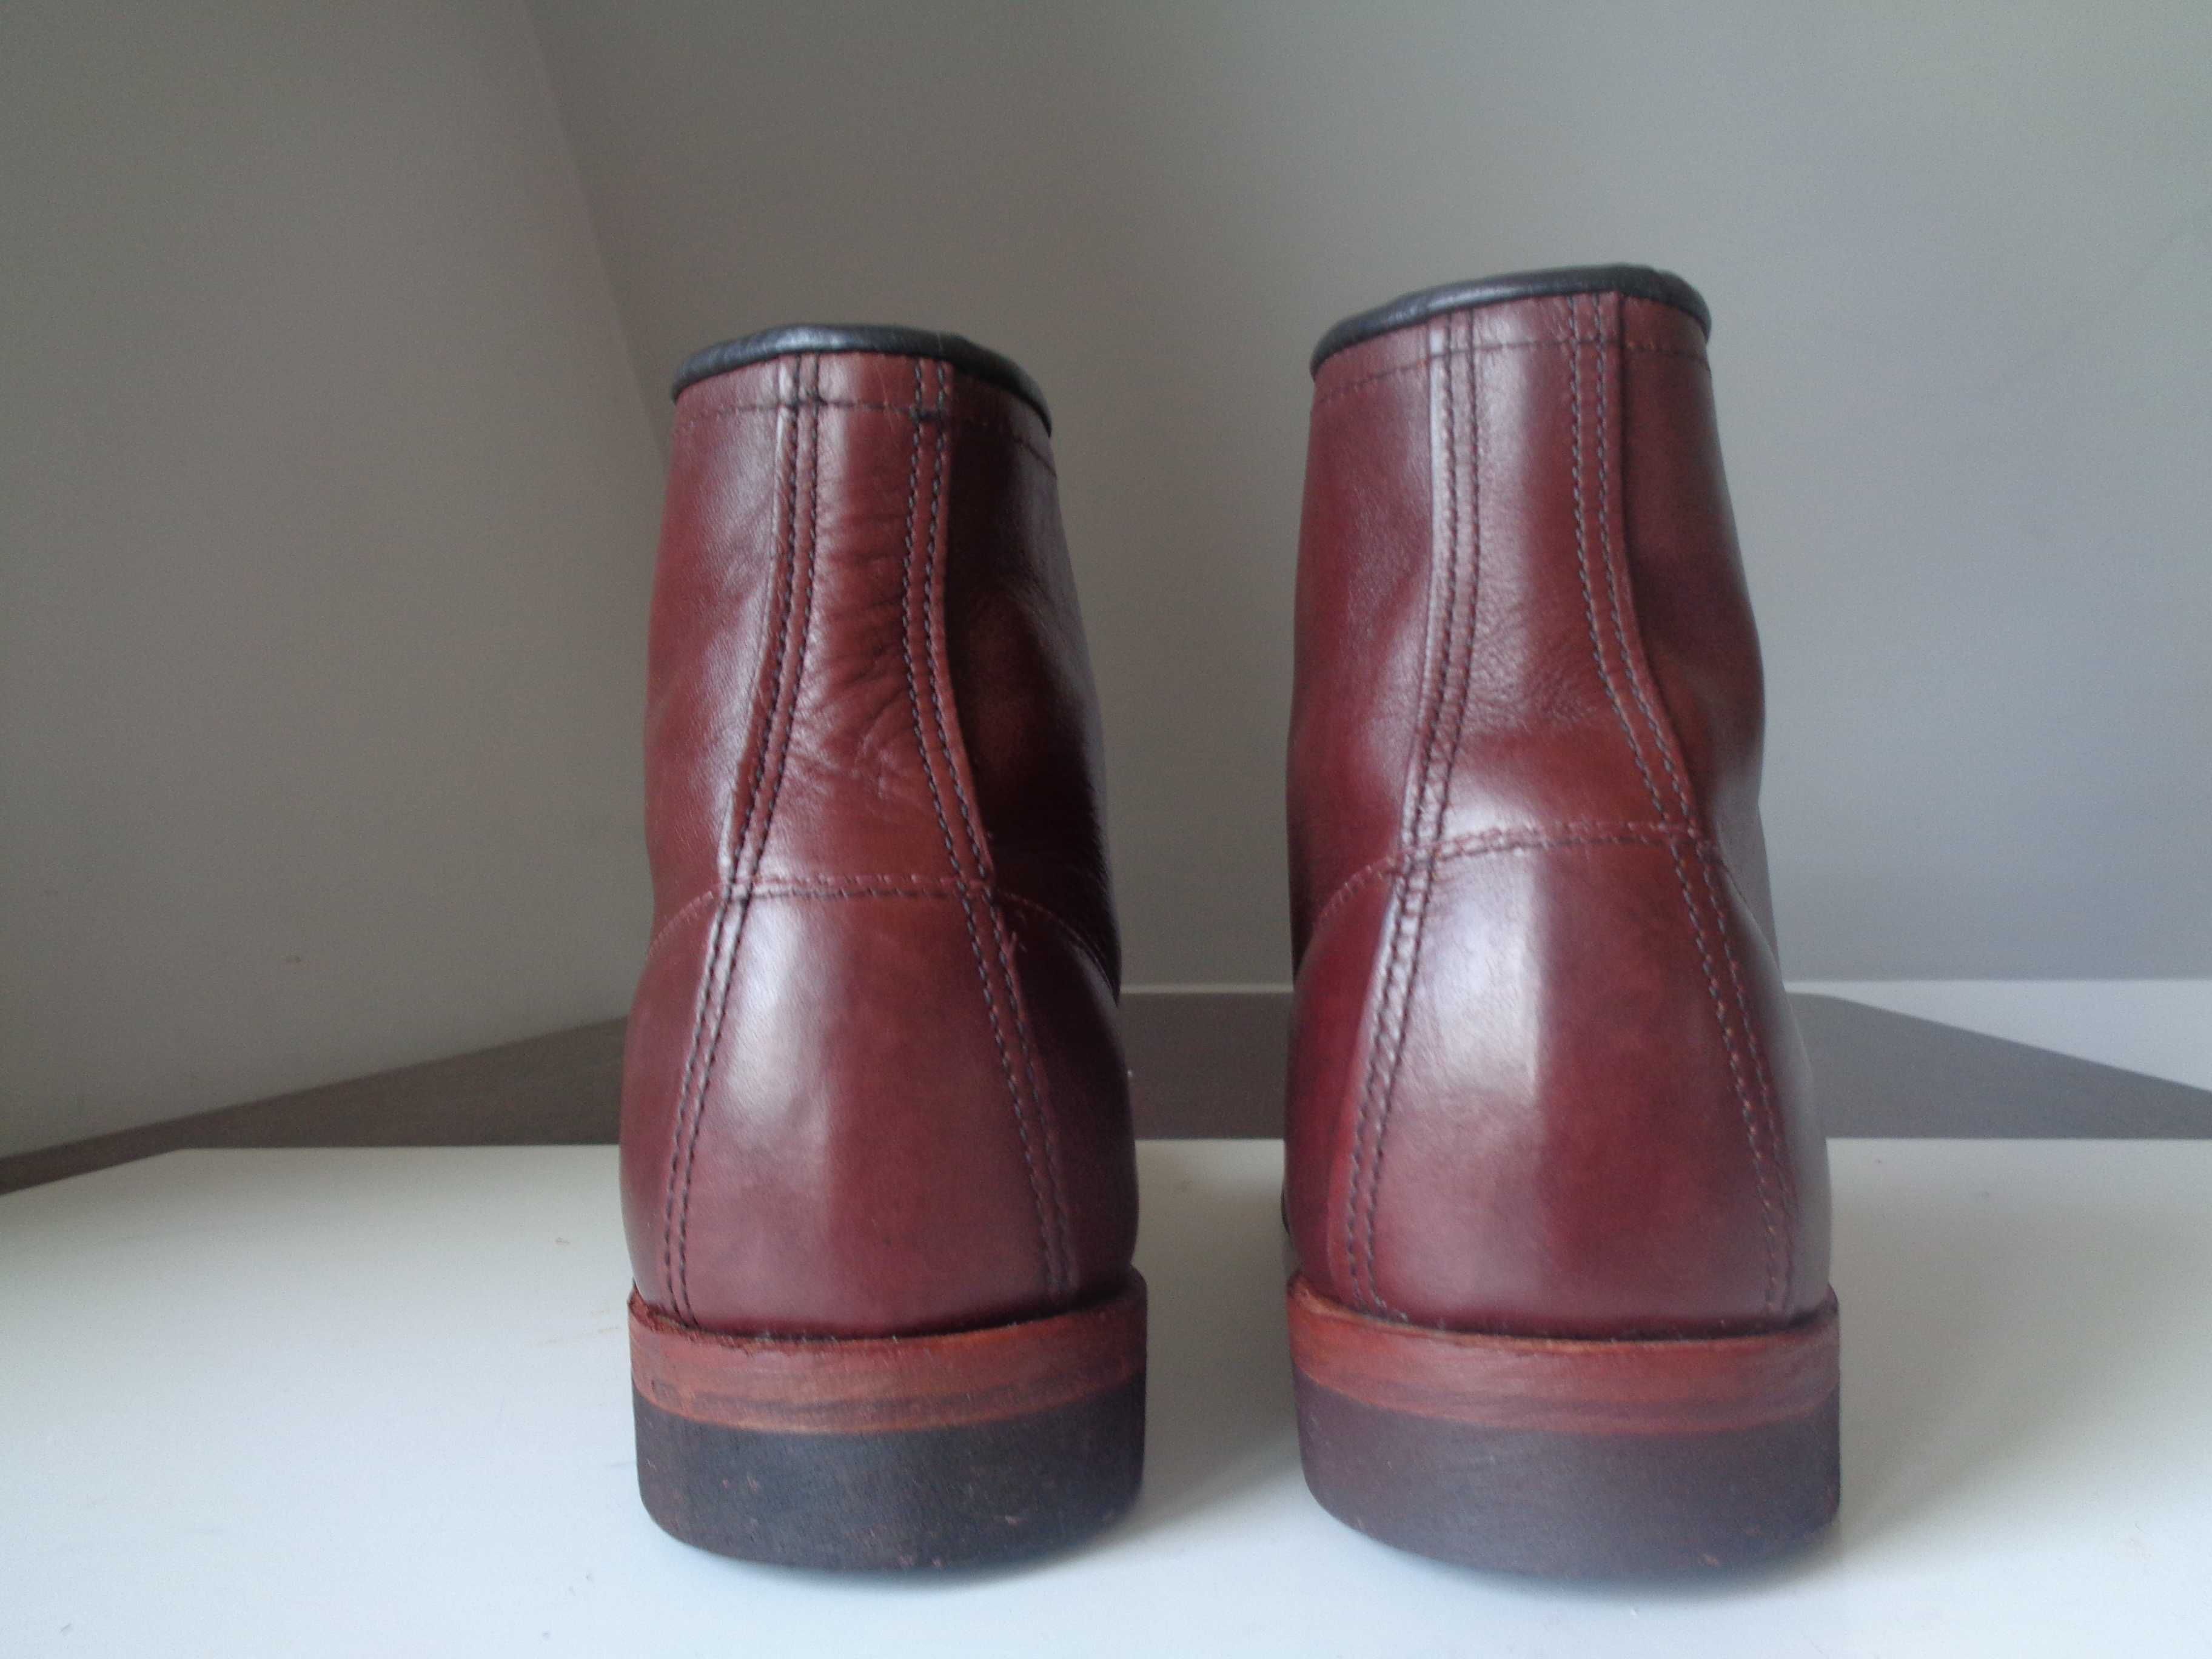 Buty trzewiki Red Wing 8/42 Black Cherry 9011 Heritage Beckman